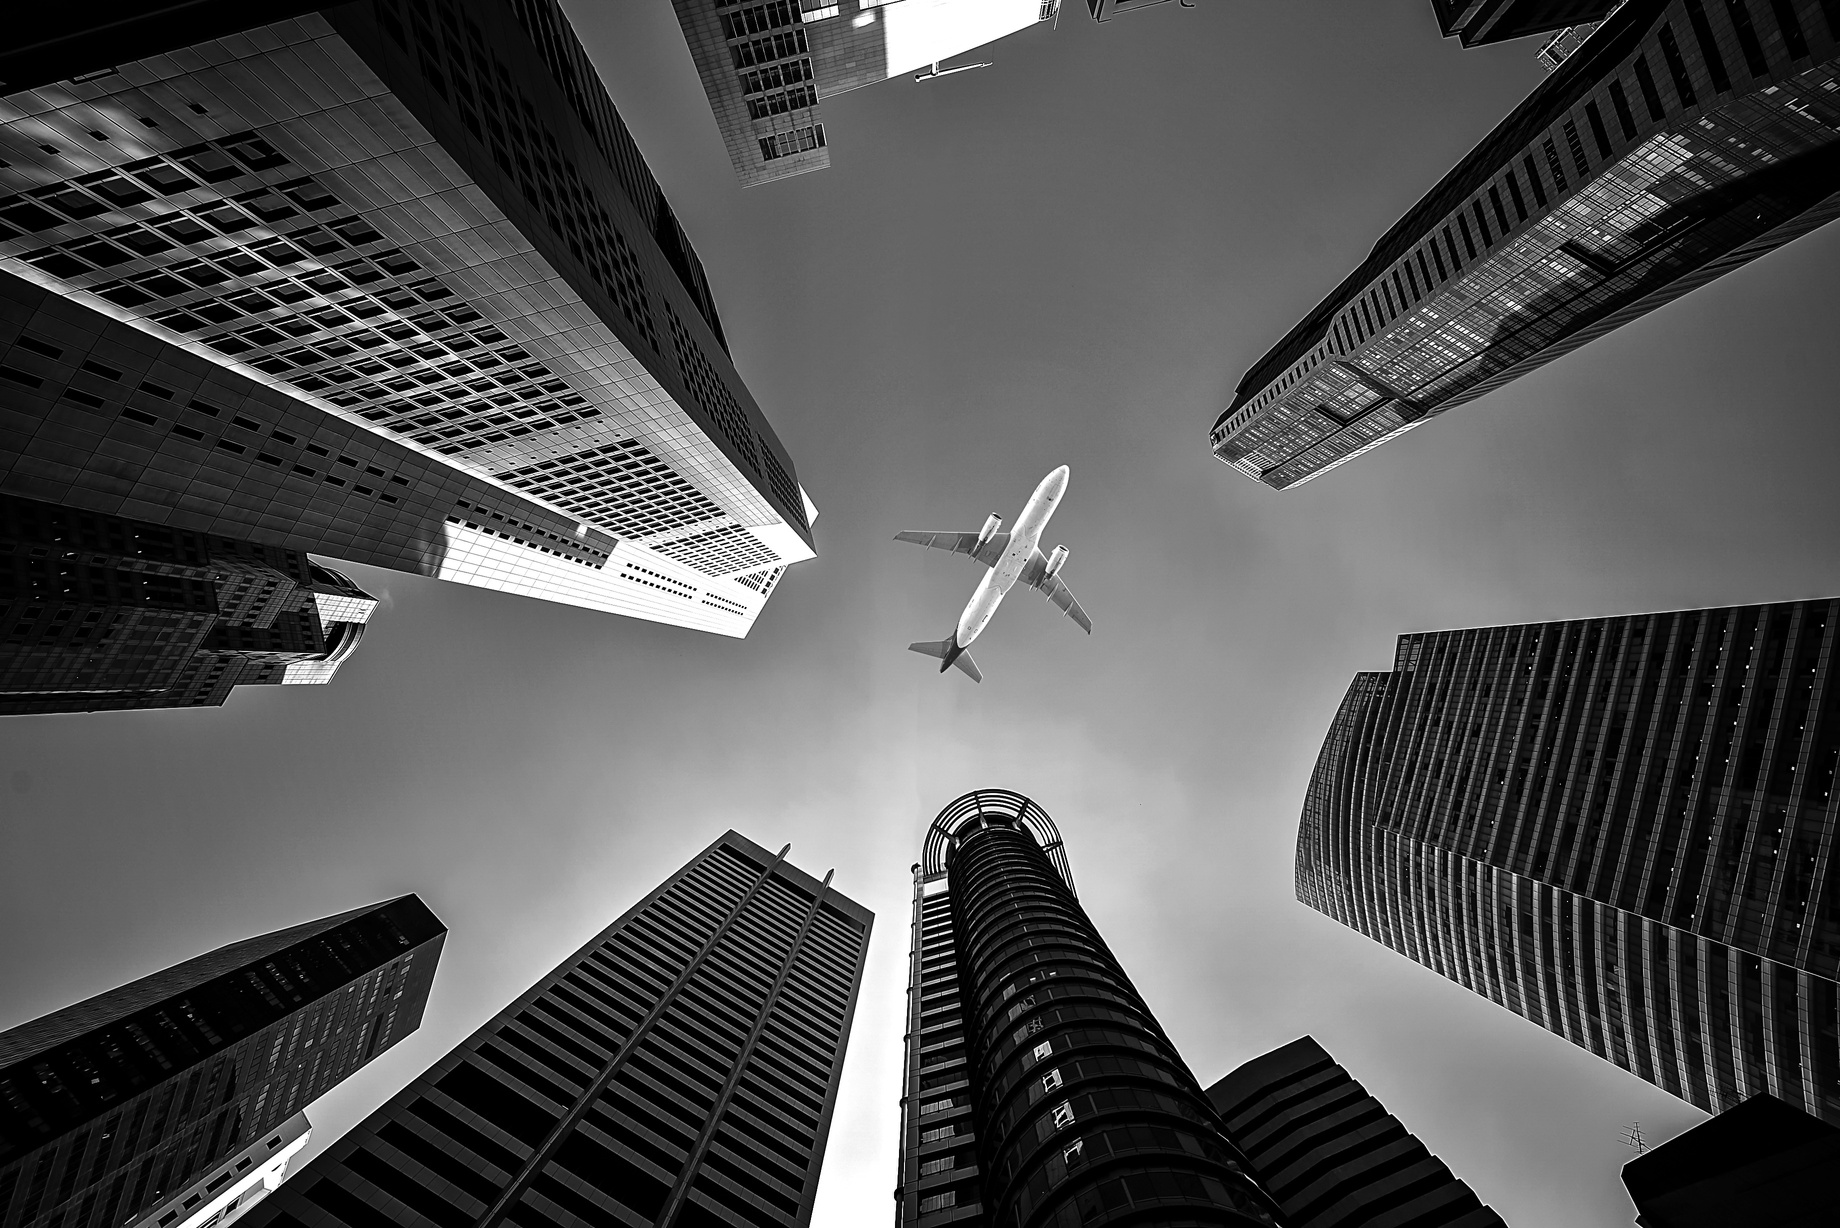 Worms Eye View of Skyscrapers and Airplane